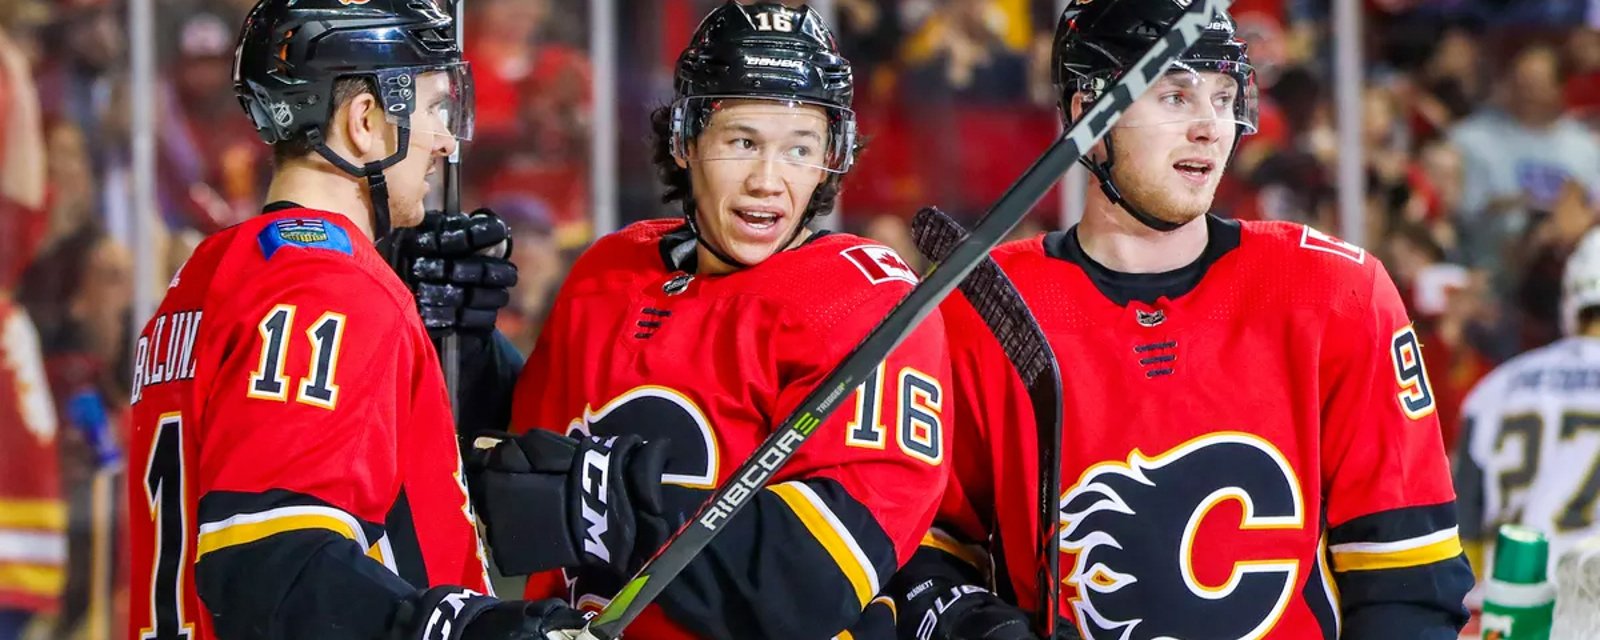 Flames forward leaves team for opportunity to play for China in 2022 Olympics